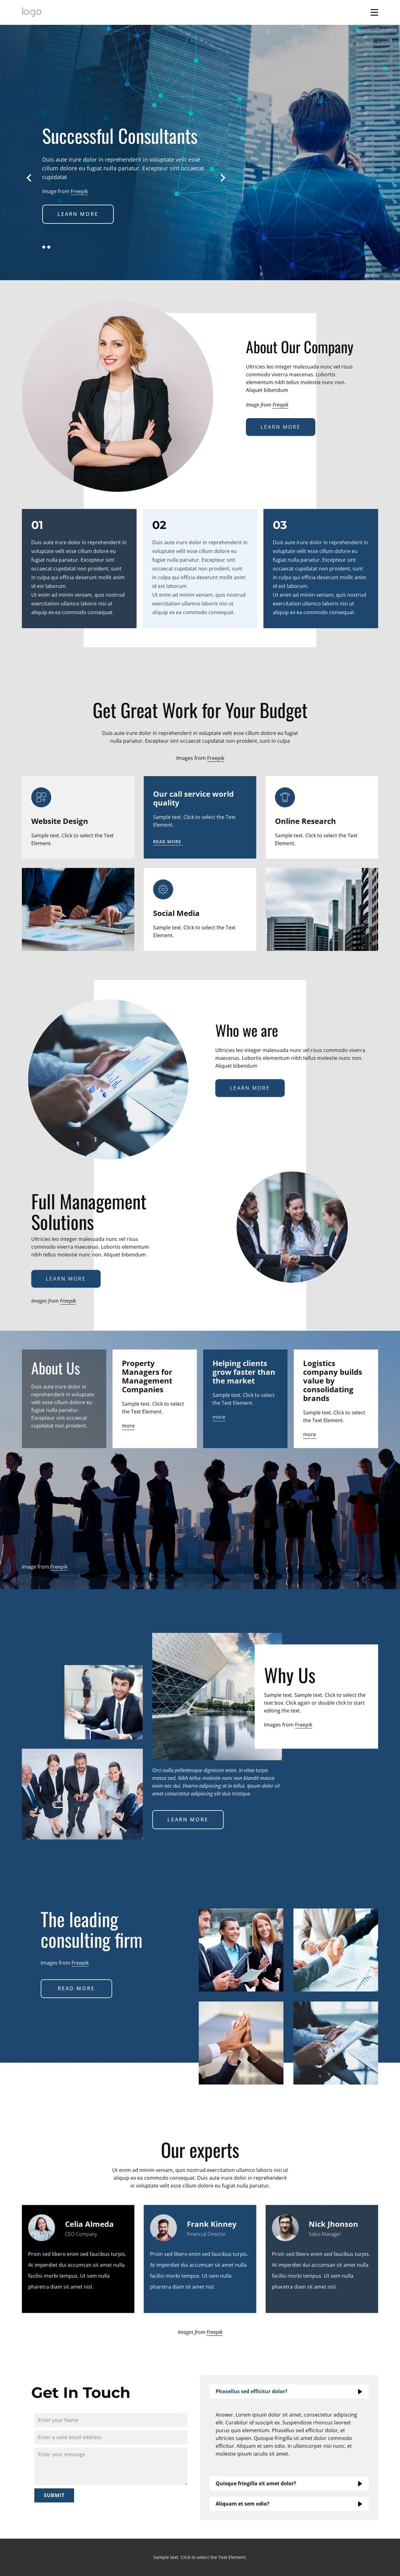 We offer tailored consulting services HTML Template